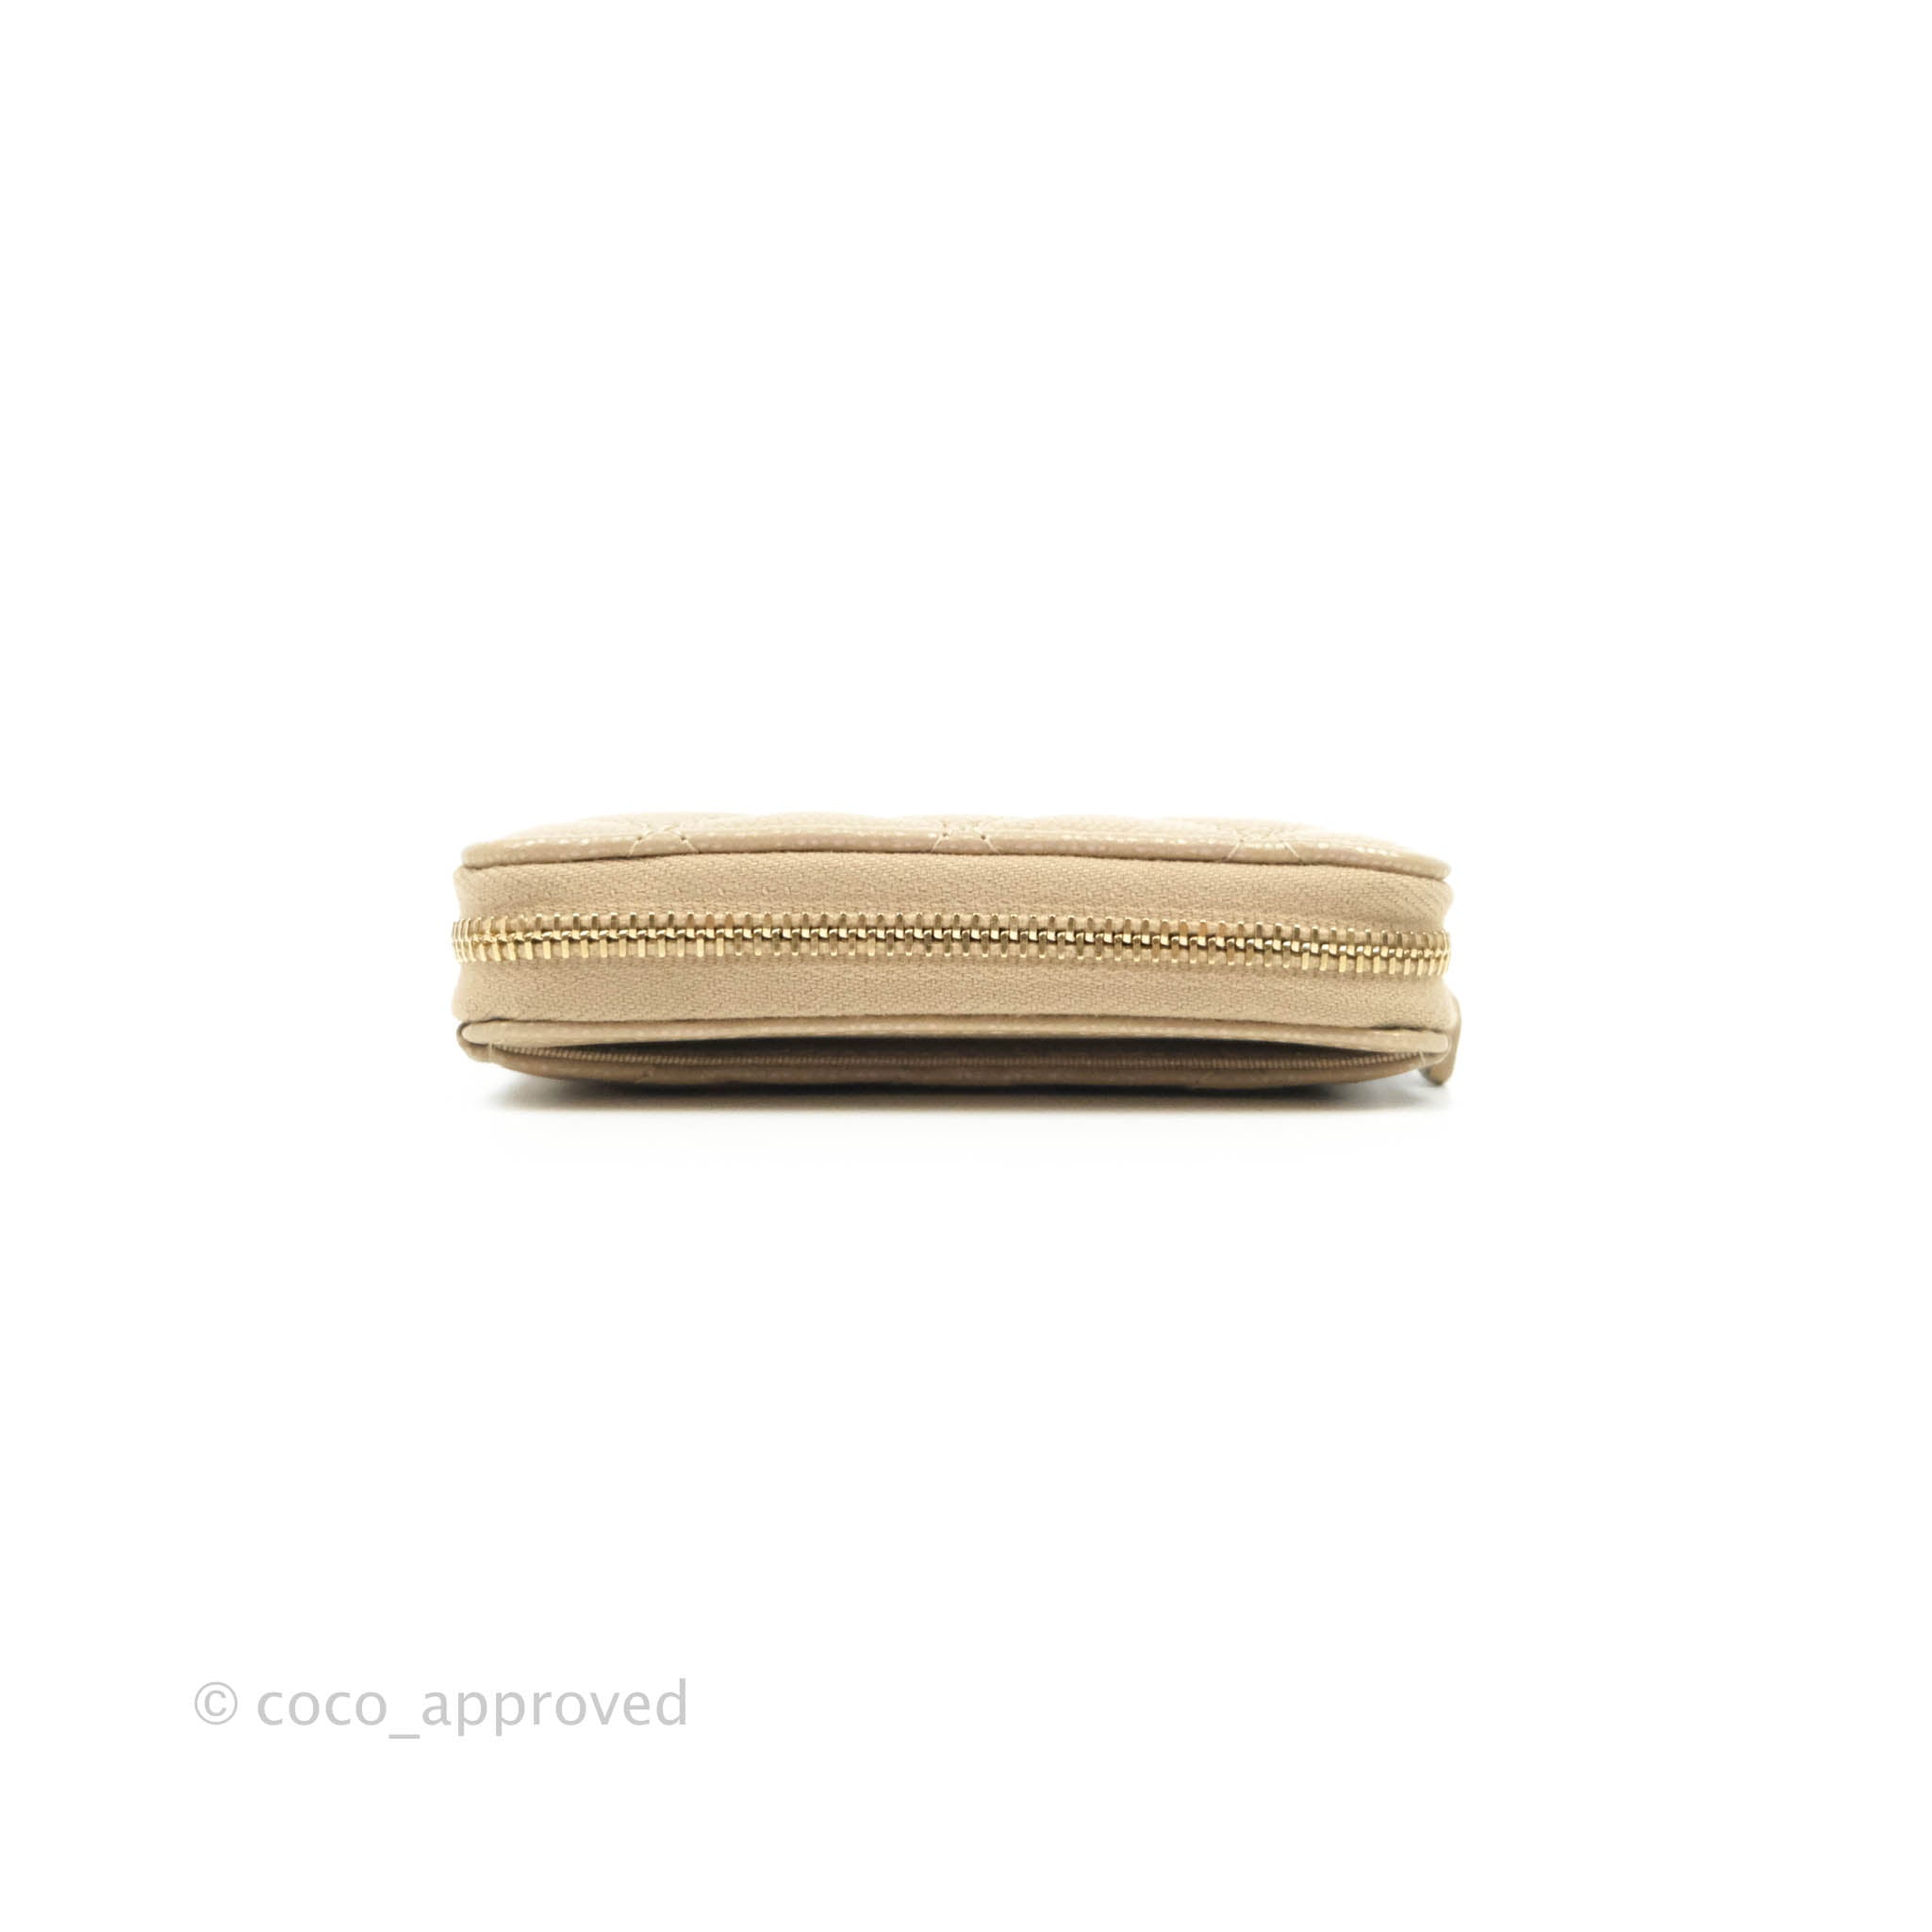 CHANEL, Accessories, Chanel Classic Zipped Coin Purse Beige With Gold  Hardware